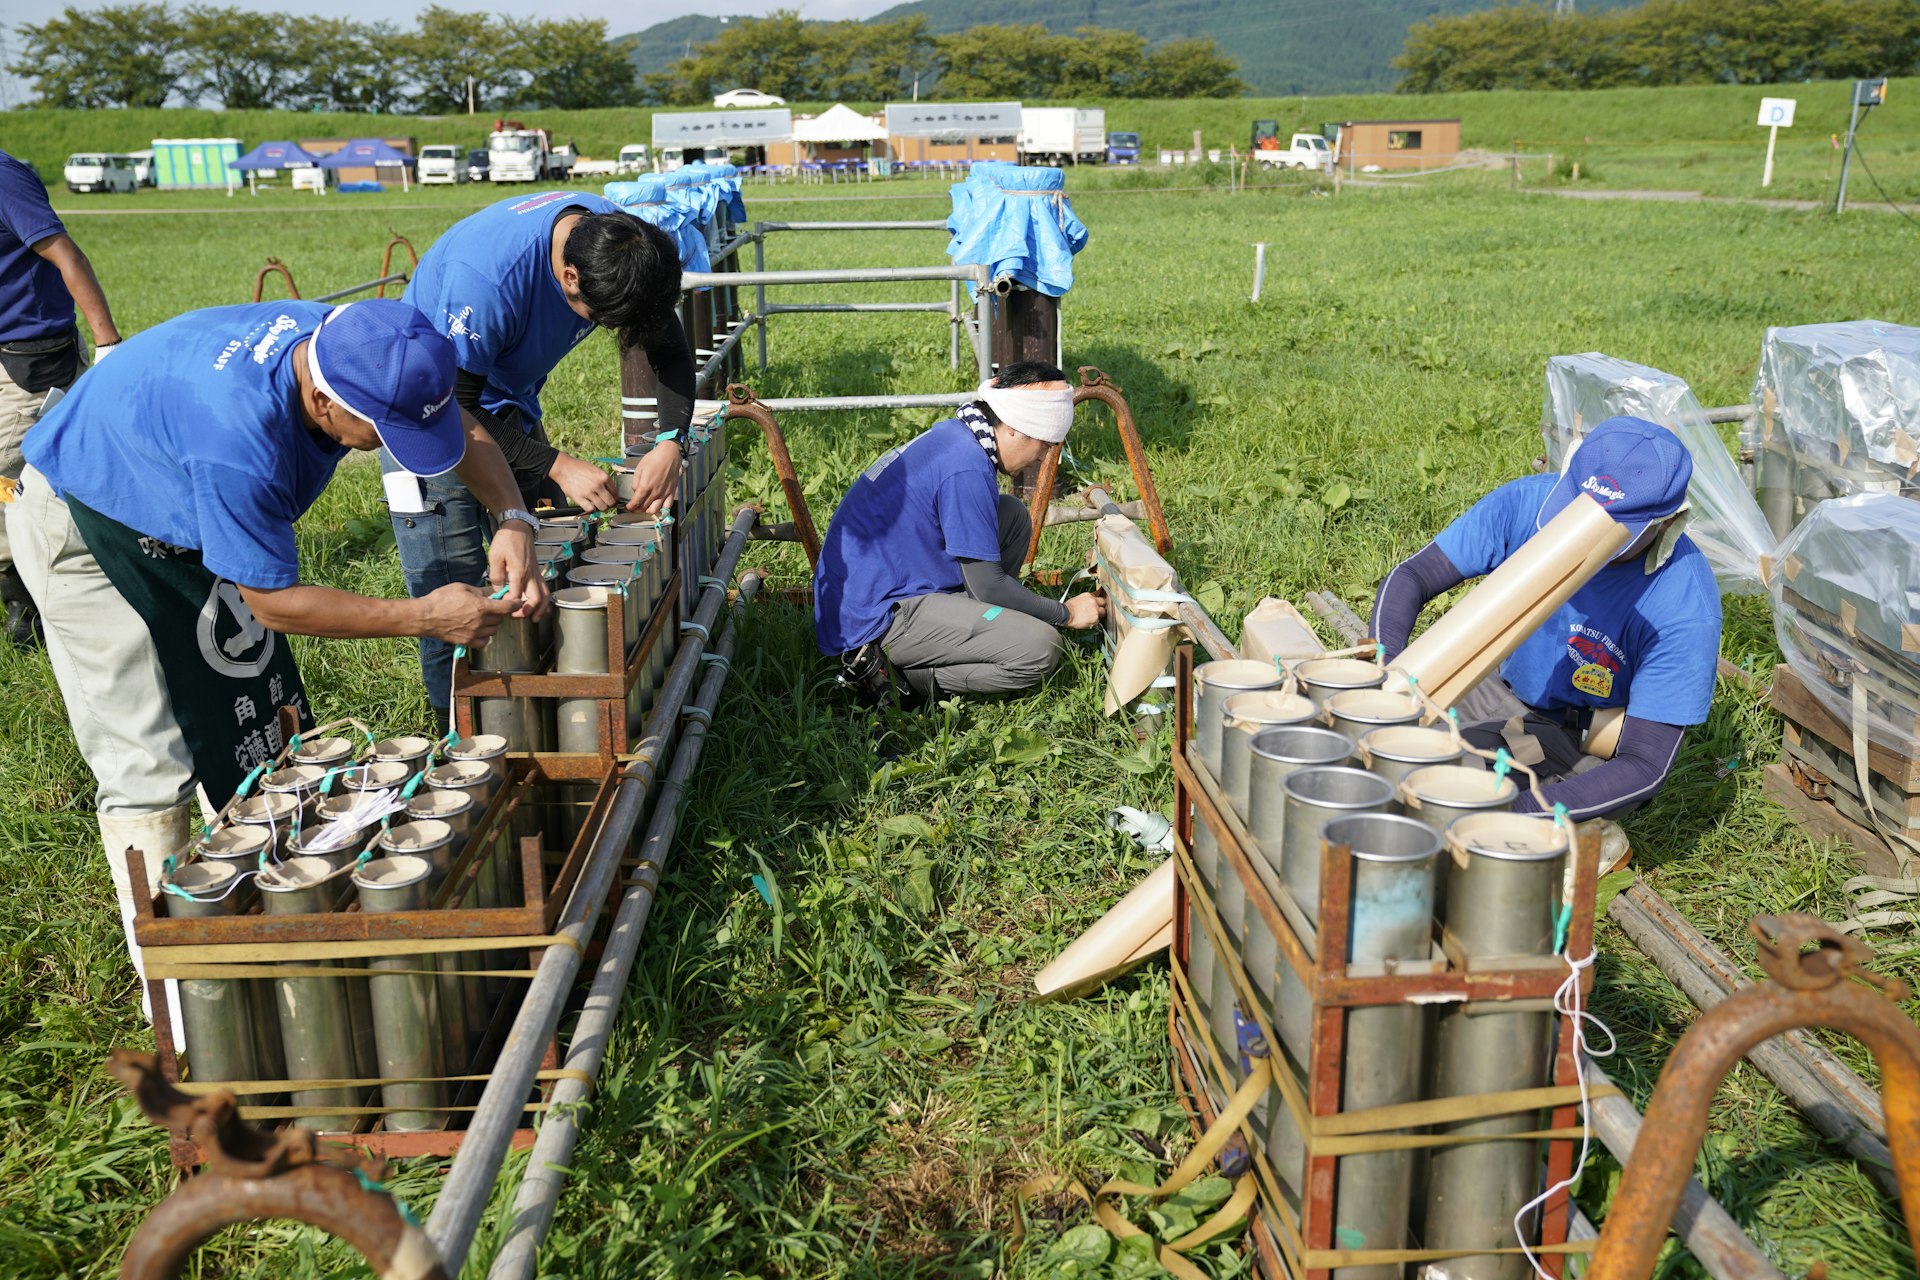 Four fireworks technicians bend over as they make adjustments to many tubes of explosives in an open field